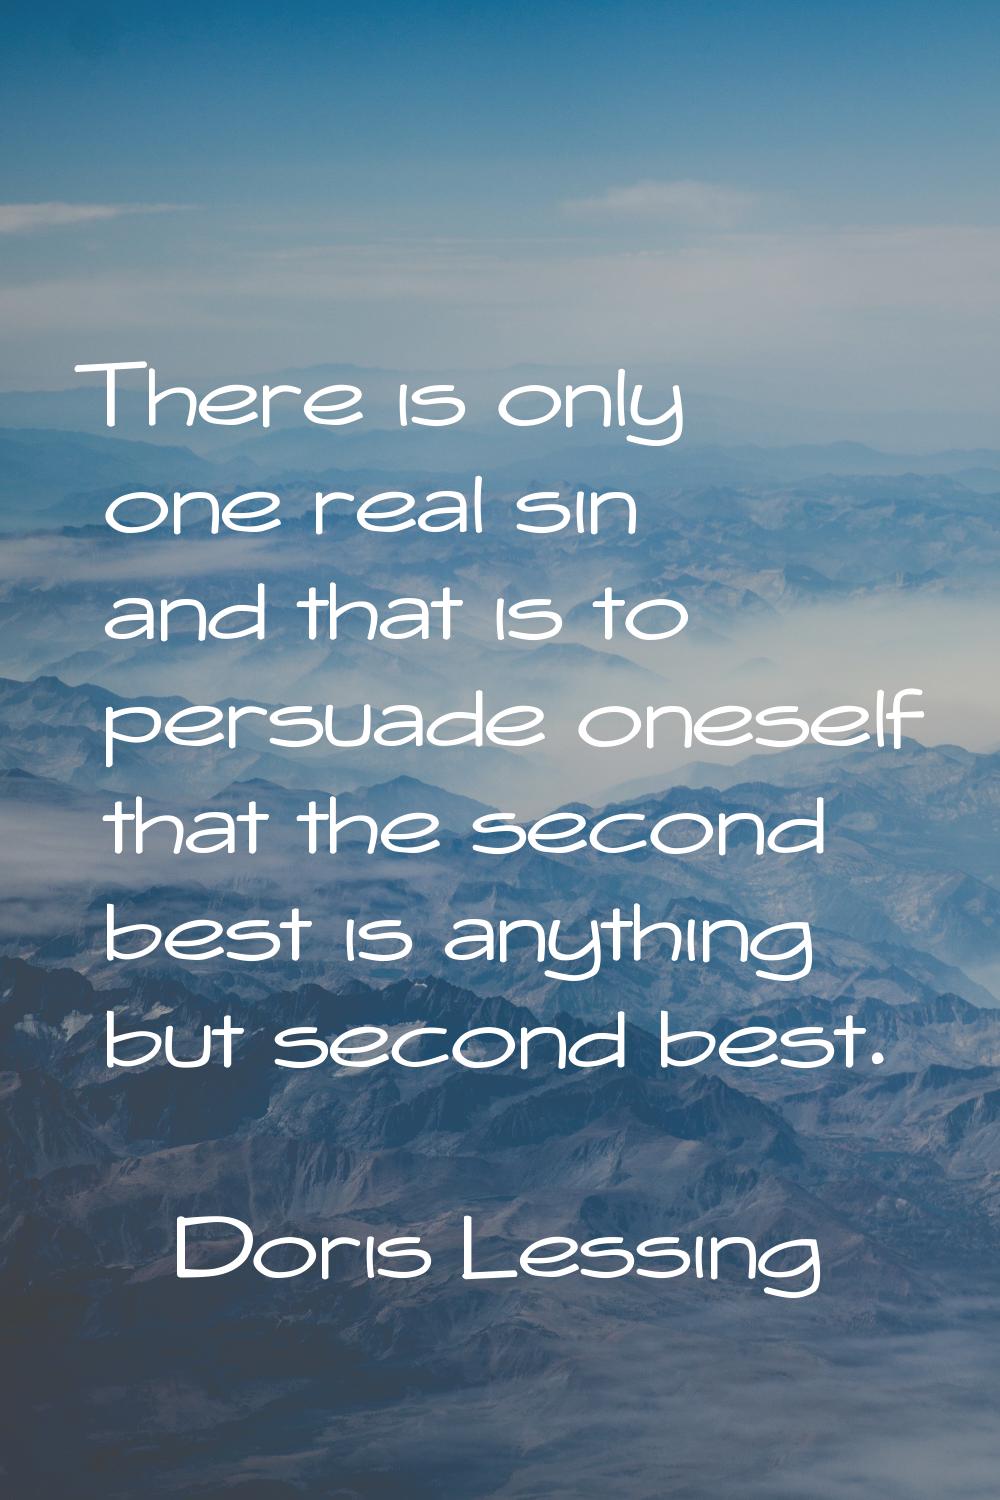 There is only one real sin and that is to persuade oneself that the second best is anything but sec